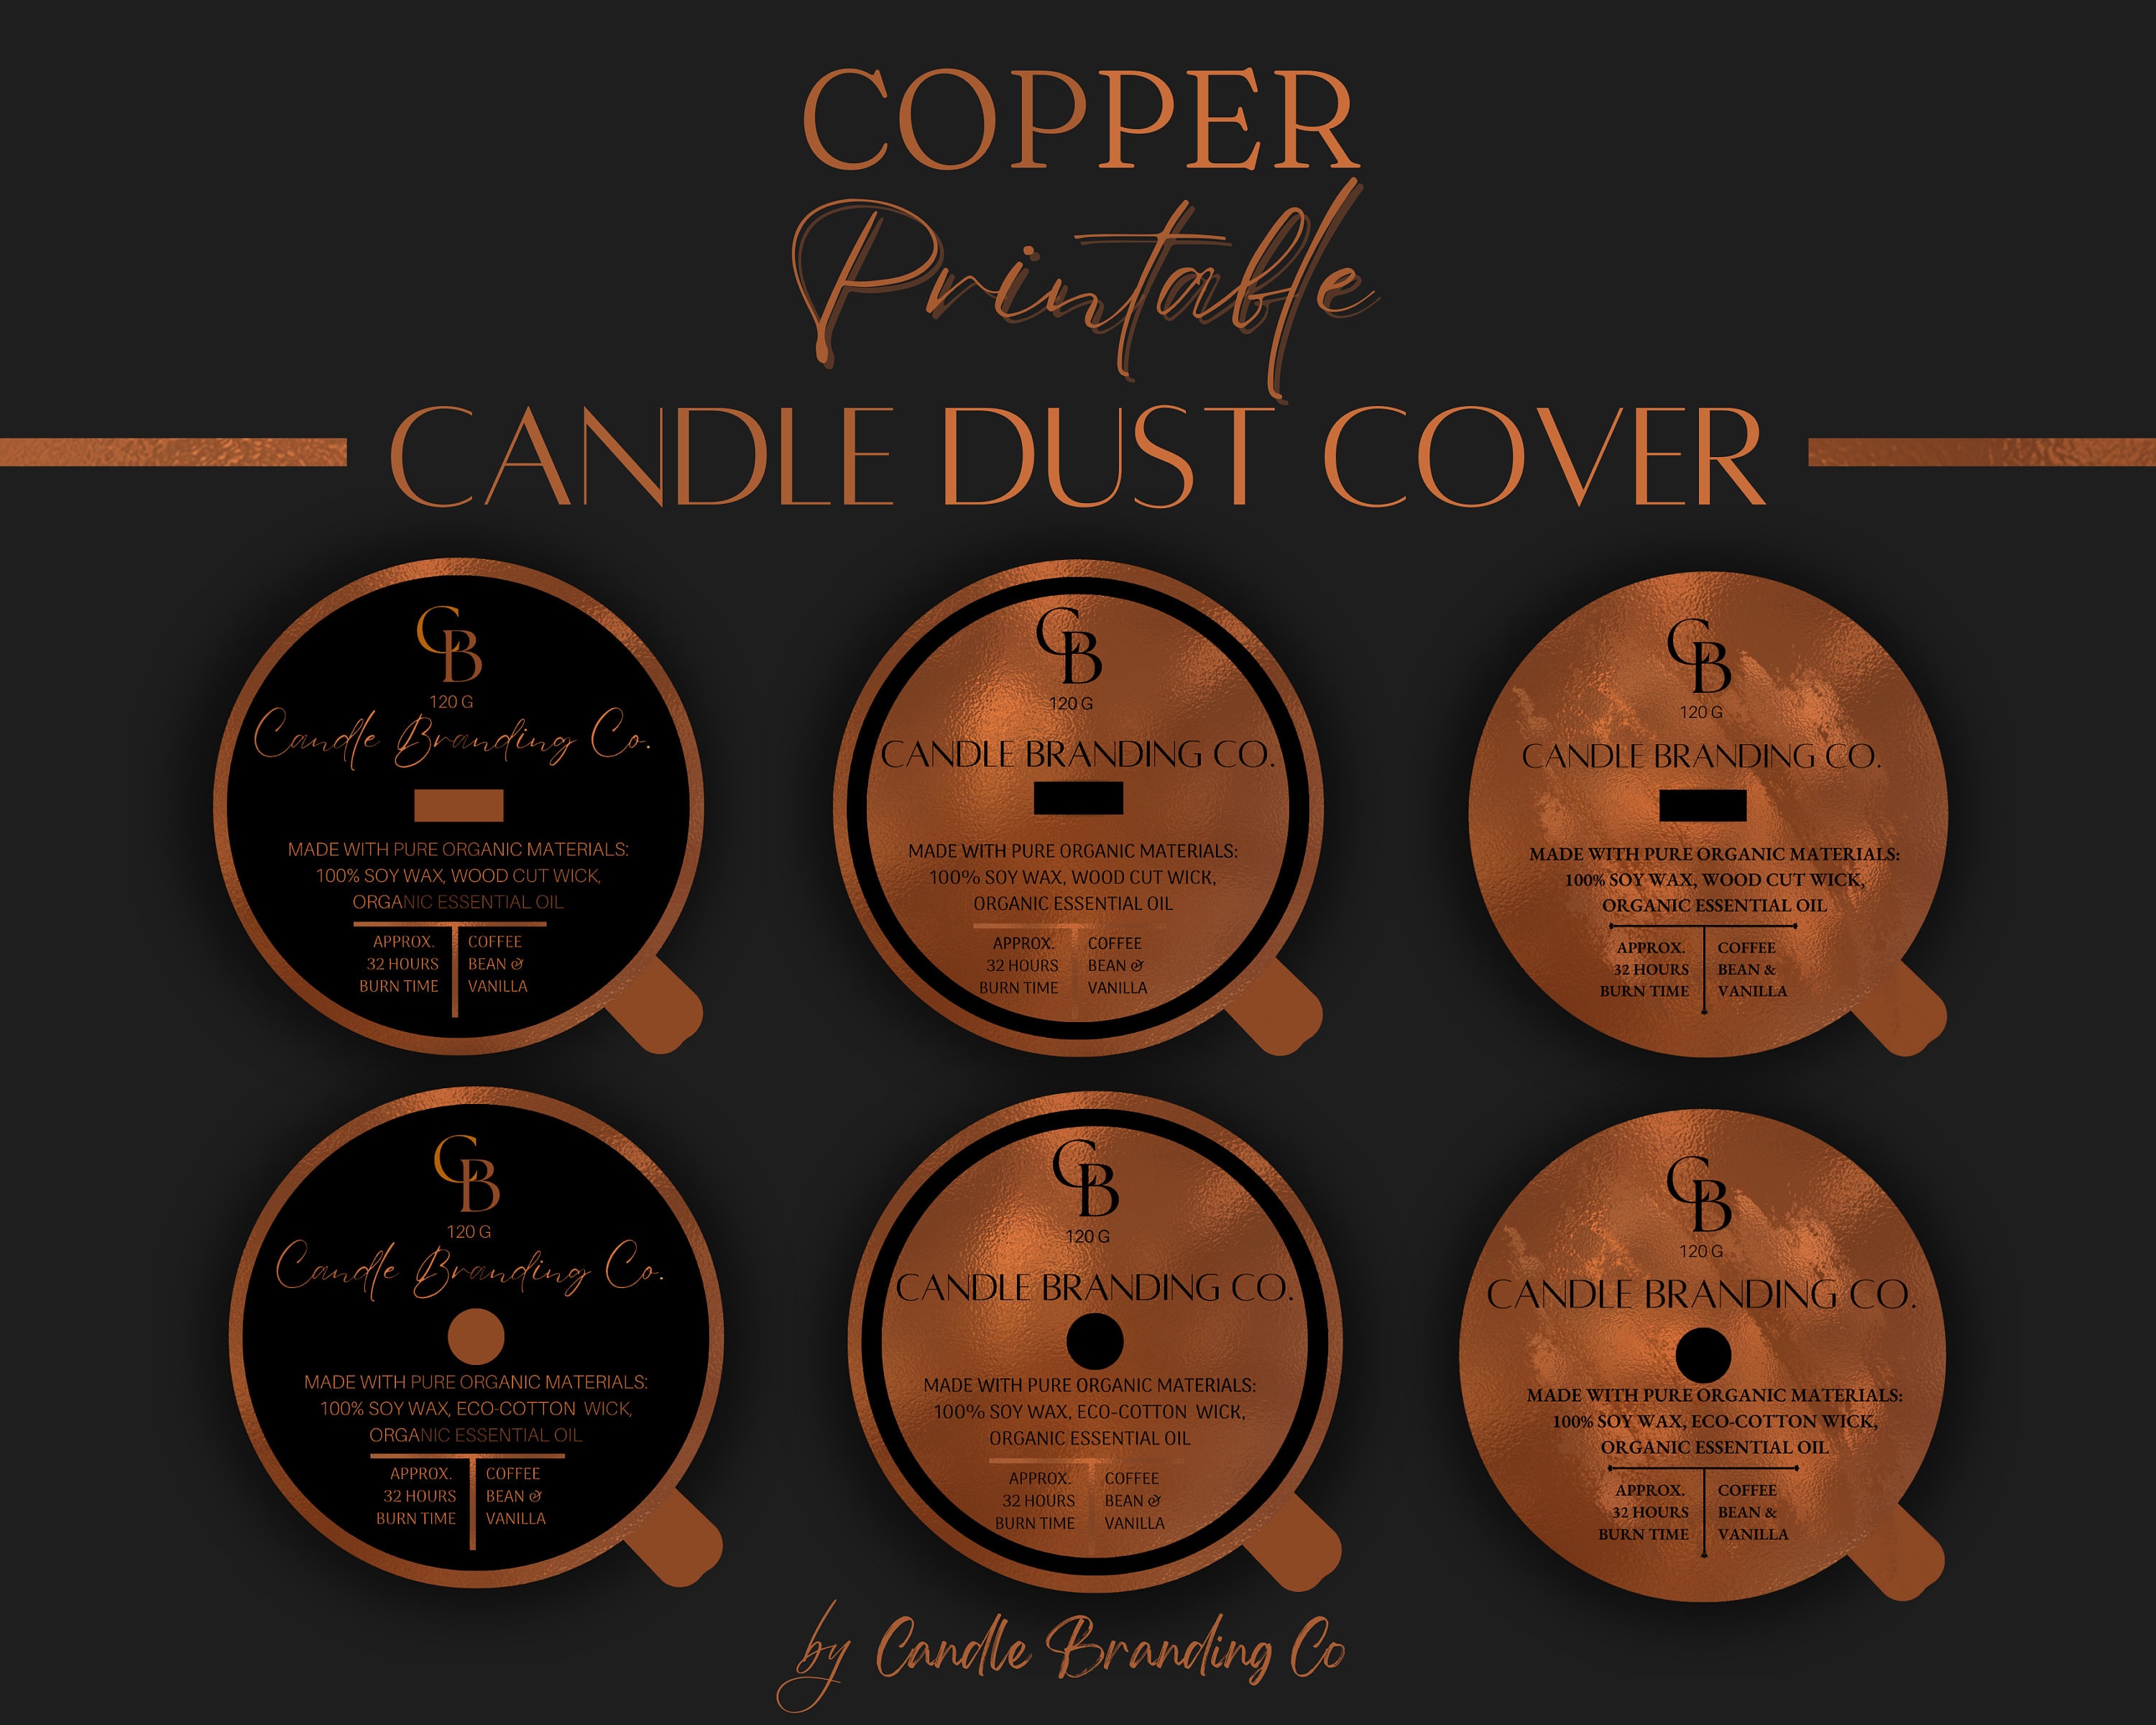 Candle Dust Cover Template, Editable Candle Dust Covers, Printable